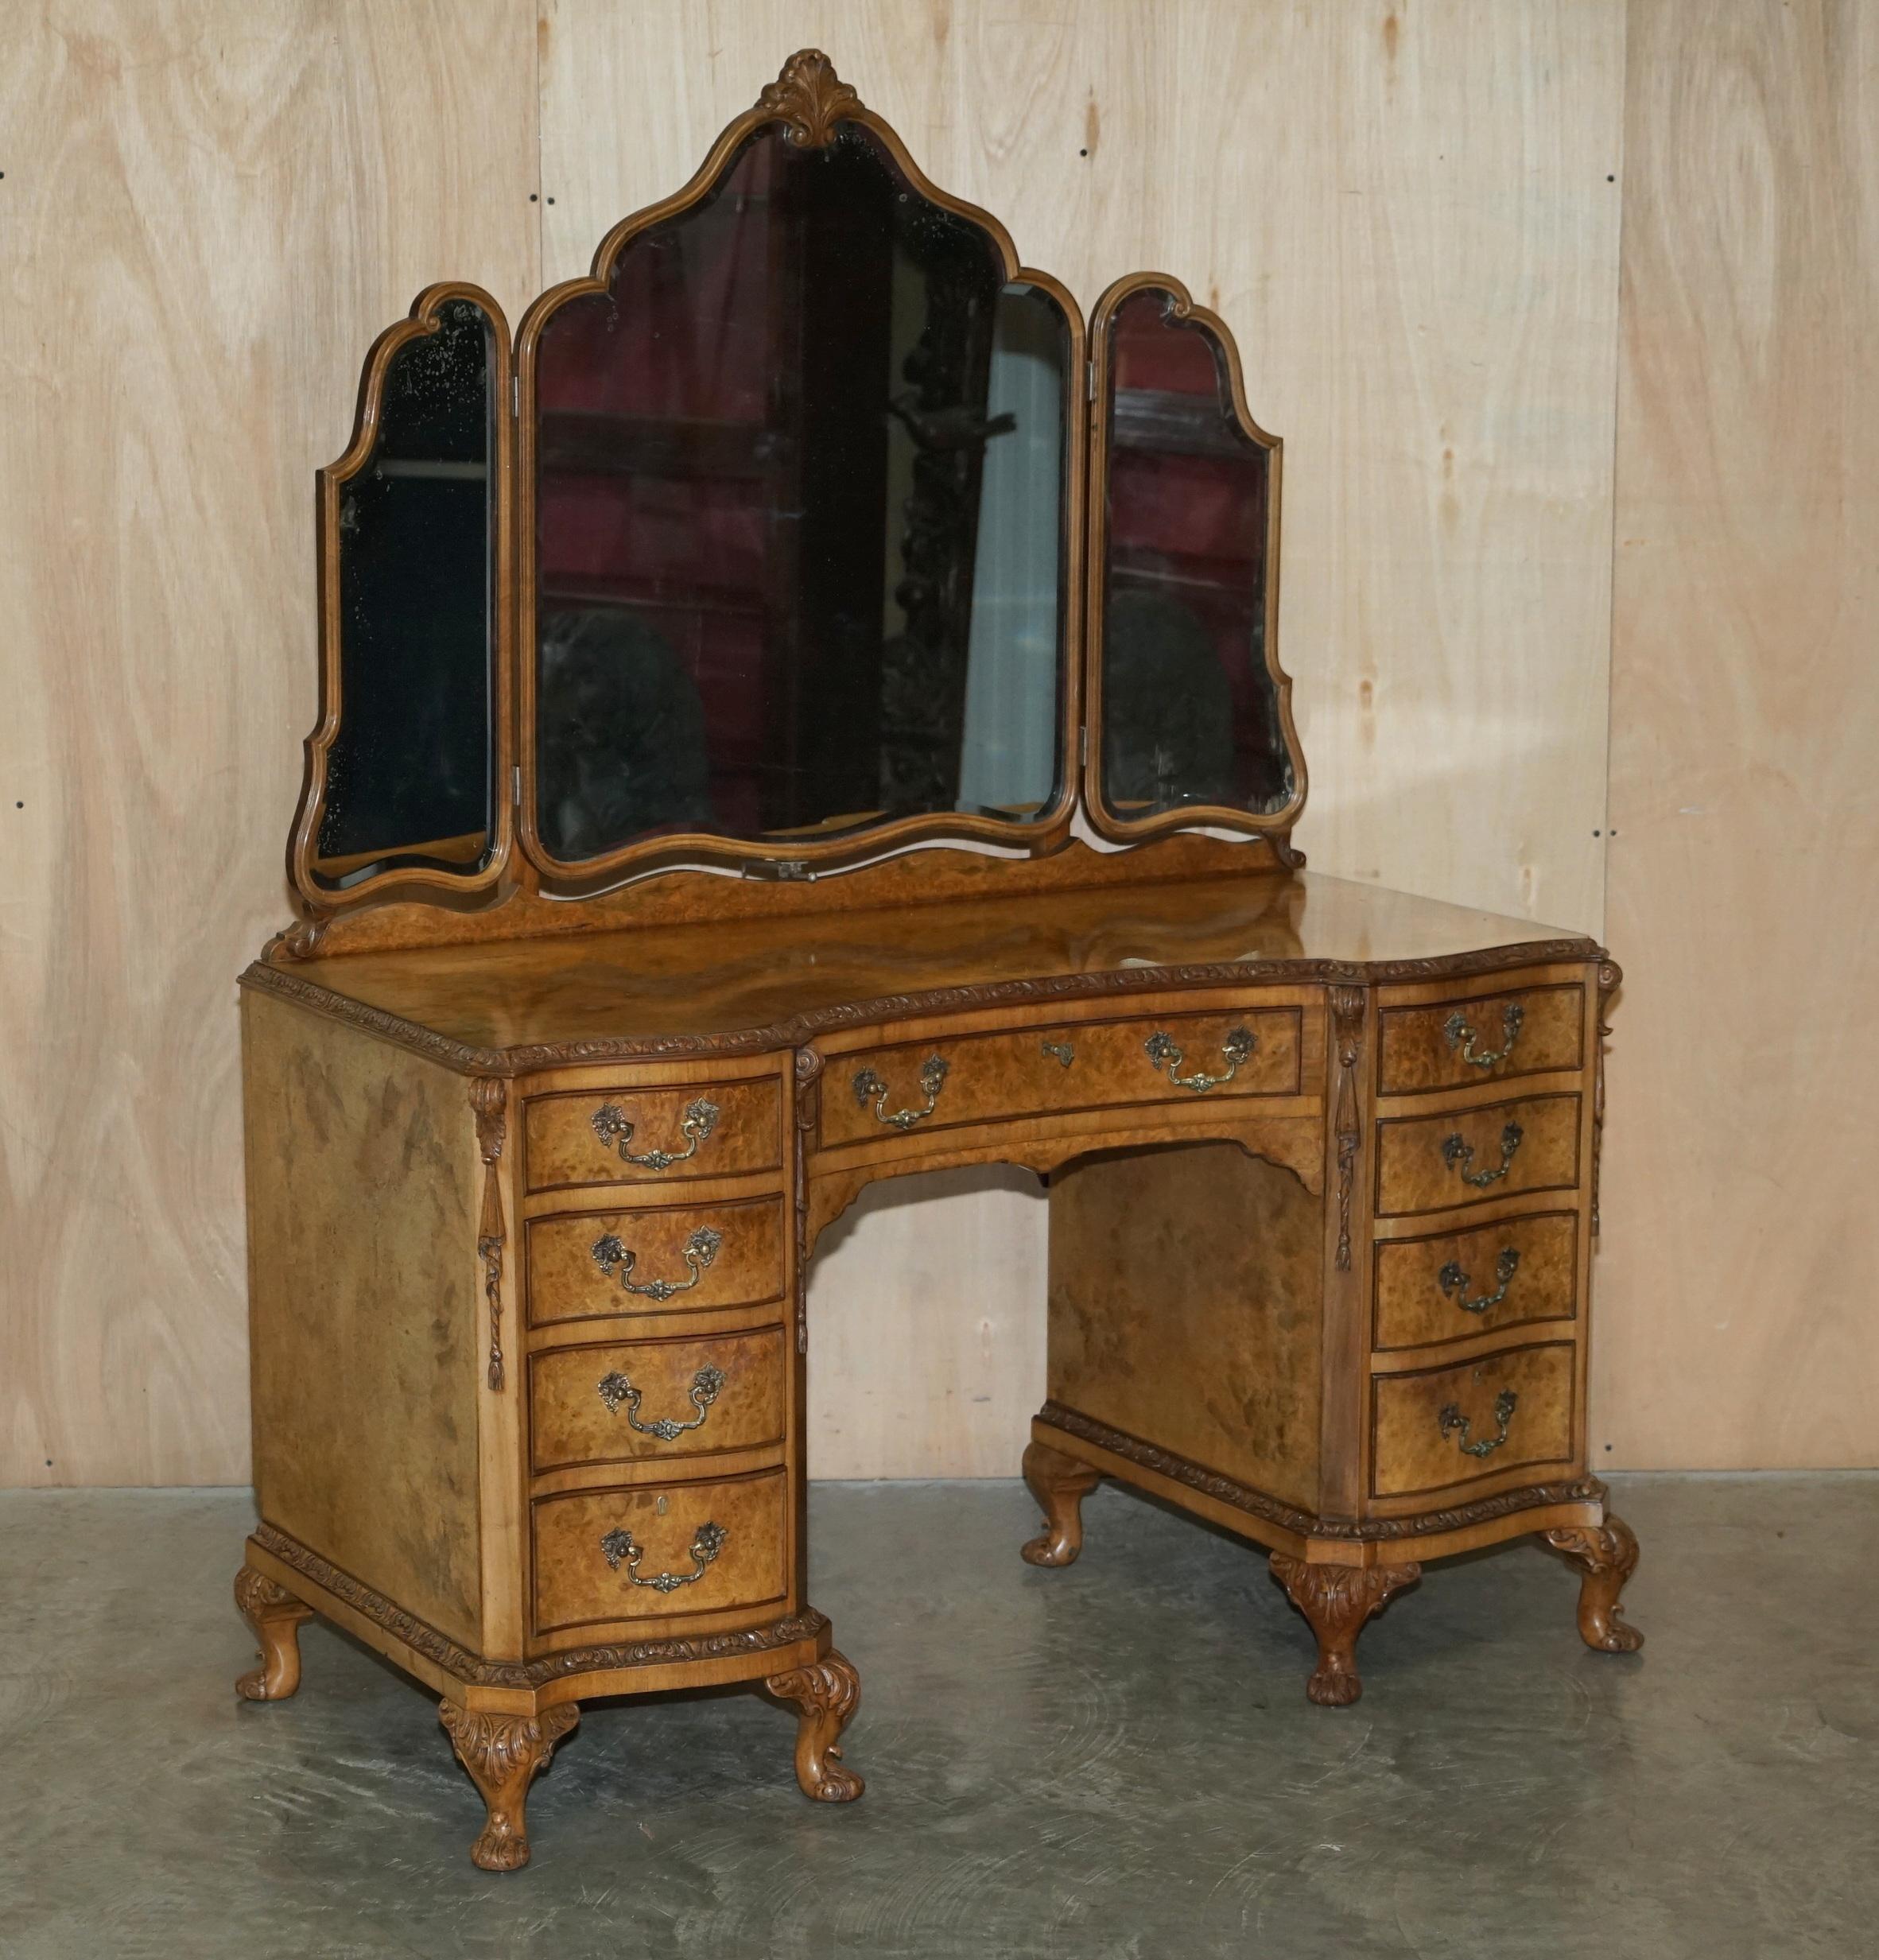 We are delighted to offer for sale this finest quality, hand carved Burr Walnut dressing table with tri folding mirrors and original matching stool

This pair are part of a large bedroom set, I have in total a pair of wardrobes, a dressing table